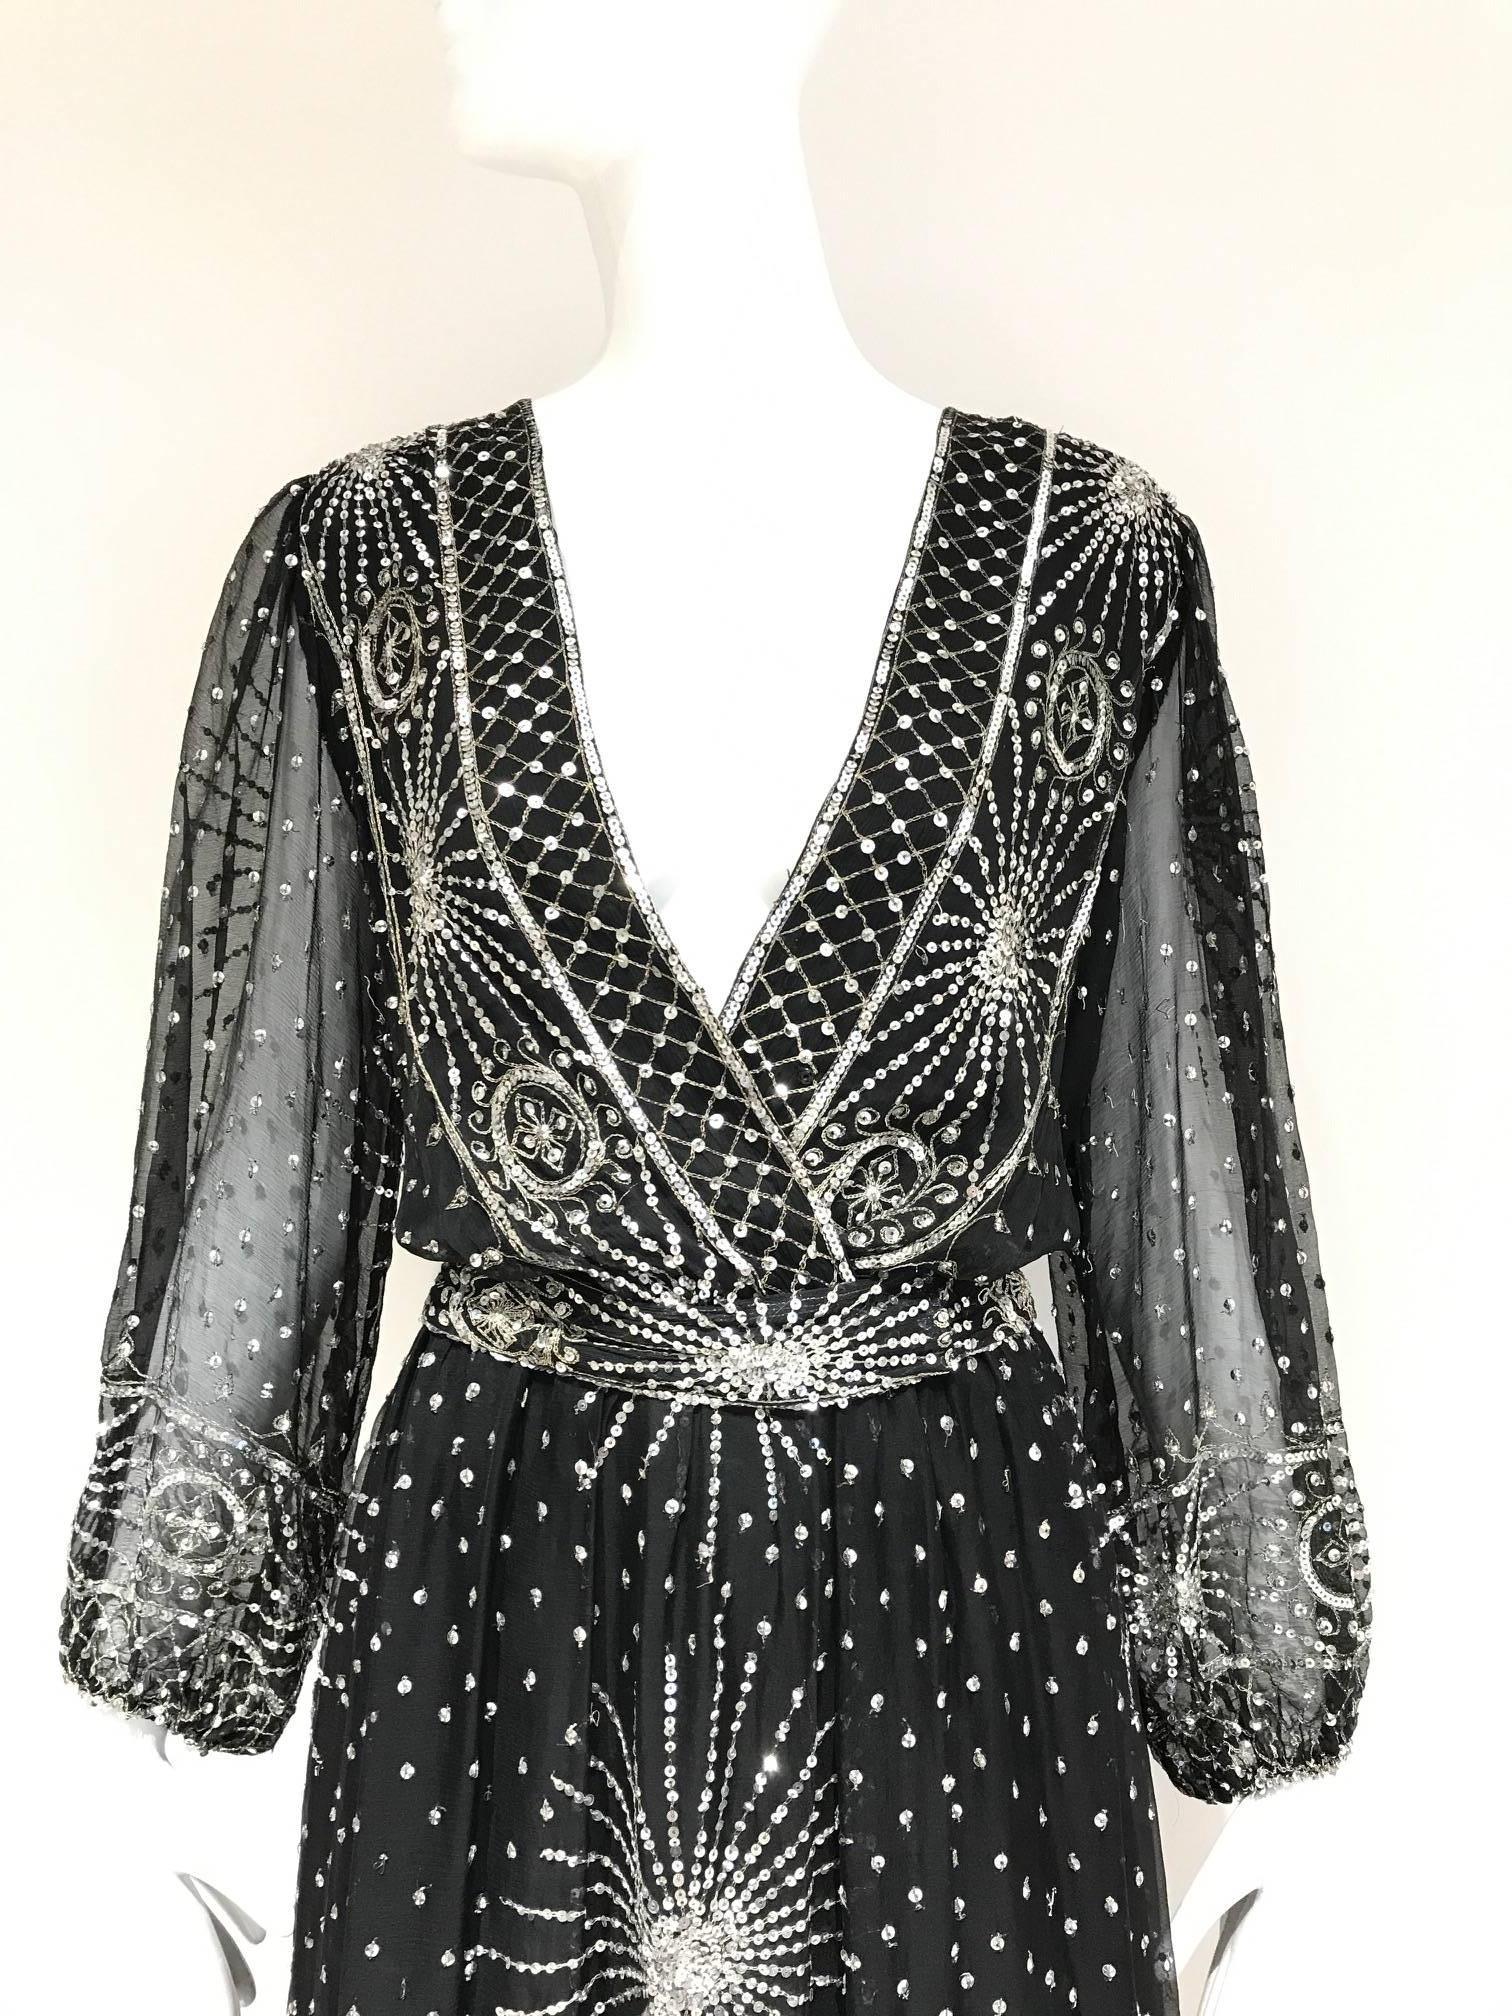 Vintage  1970s Black Silver Sequin starburst V neck Cocktail Dress.

Size 6/8 / Medium

***All Clothing has been professionally Dry Cleaned and ready to wear.